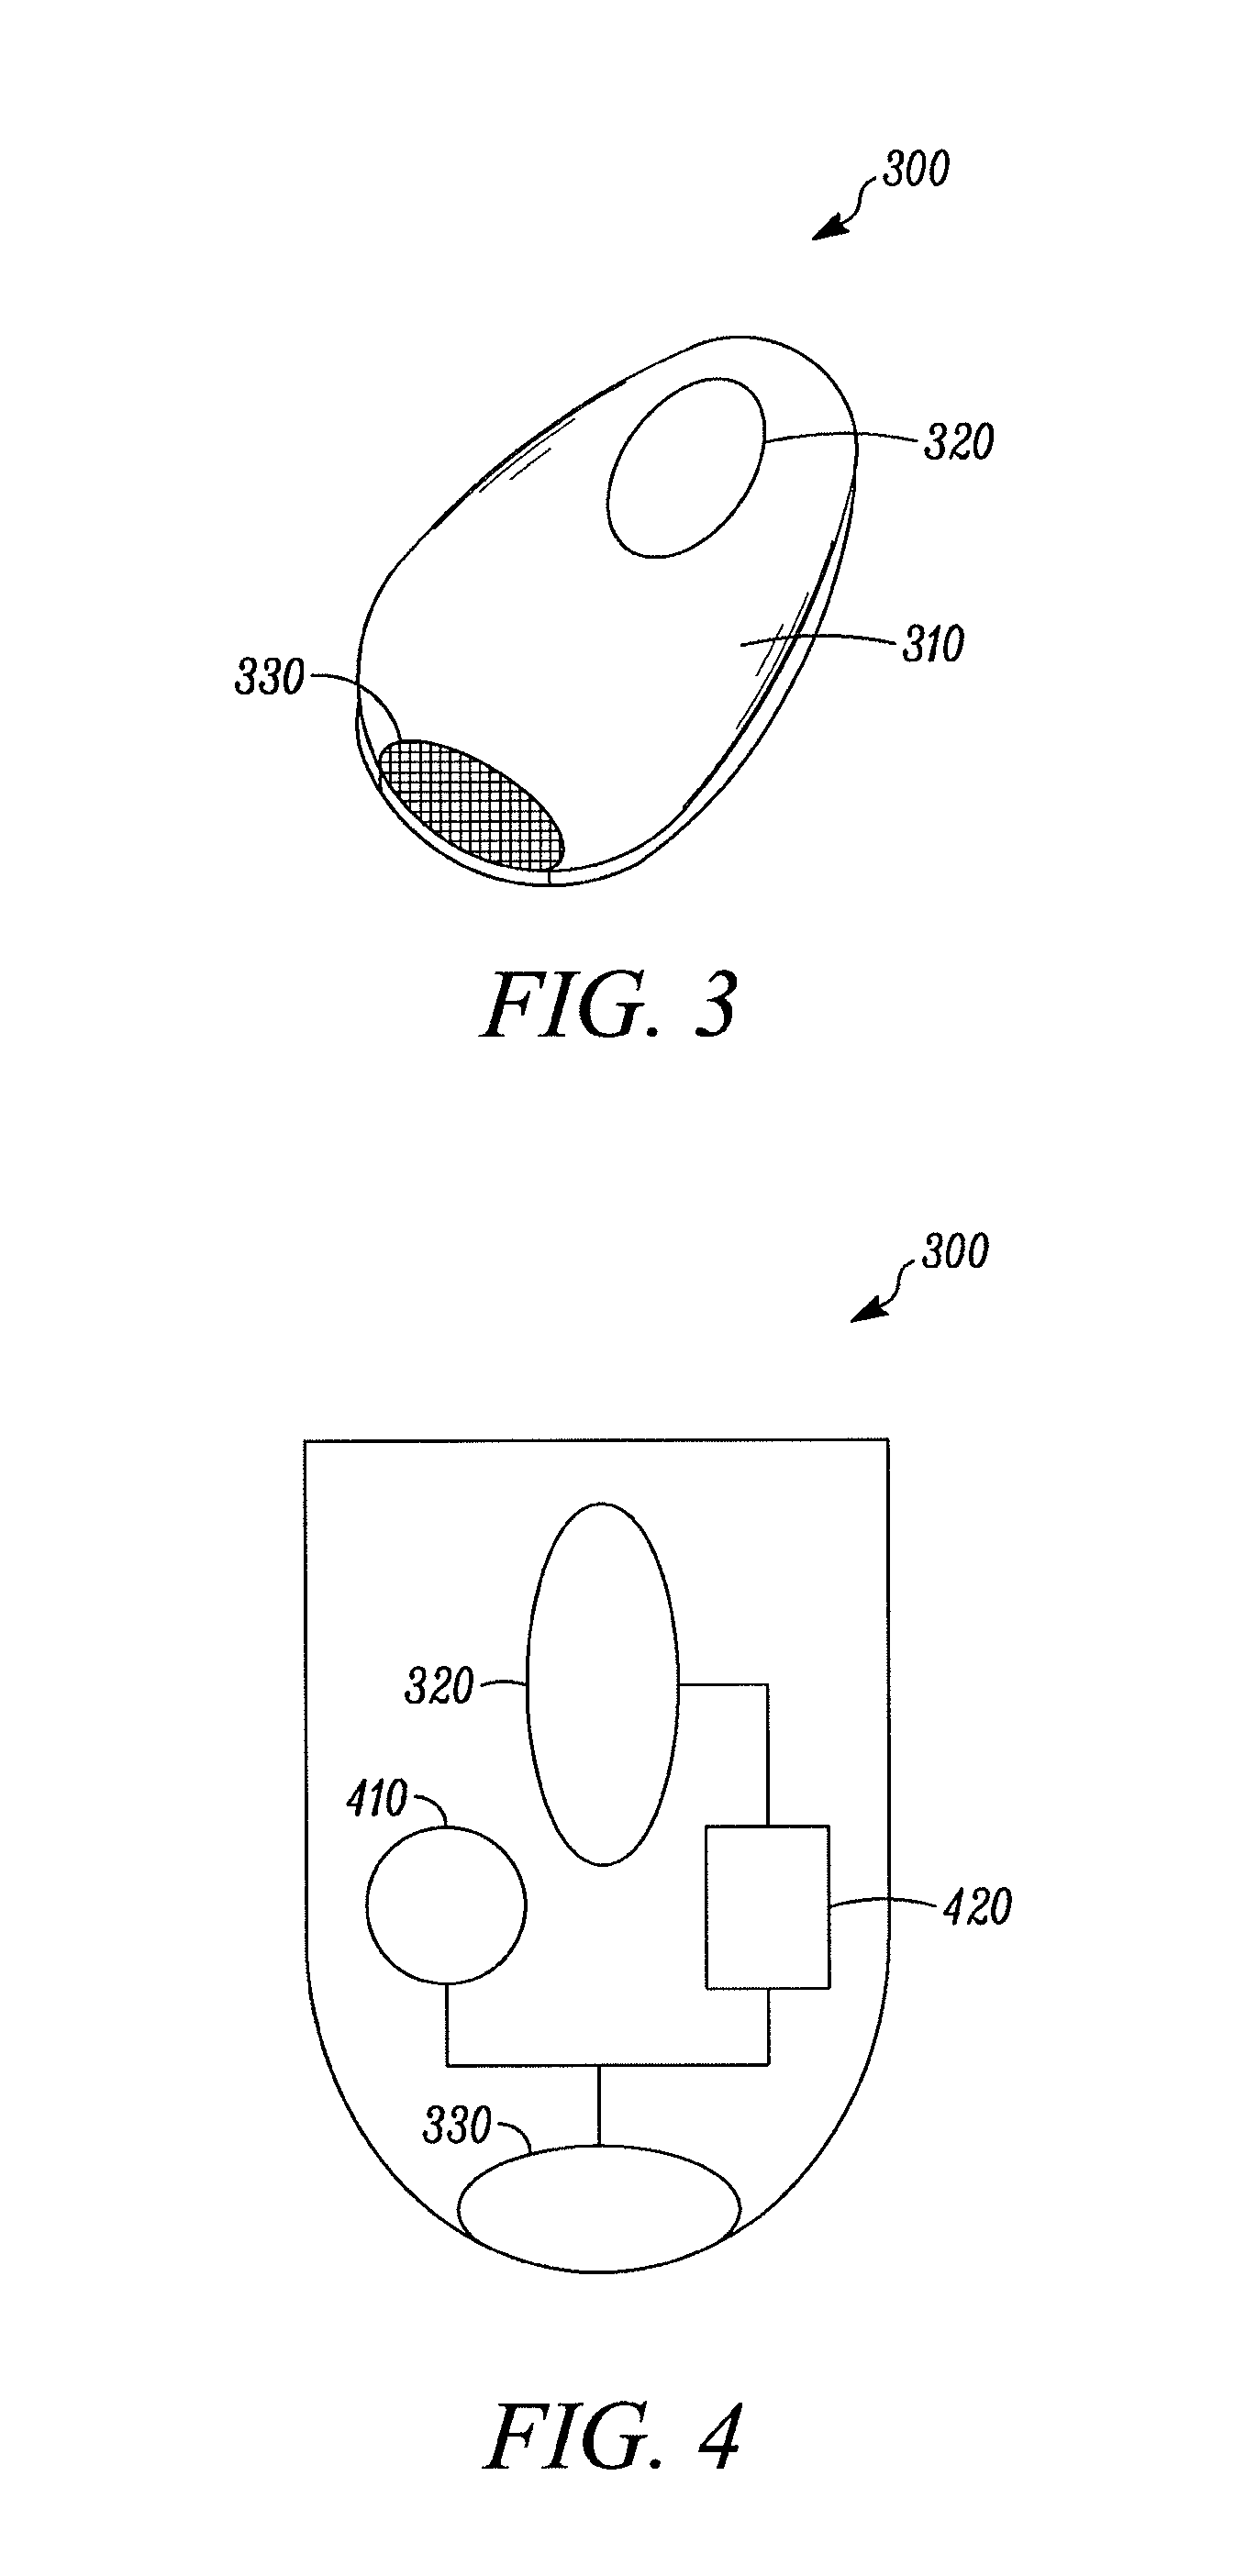 Grid shifting system for a lighting circuit